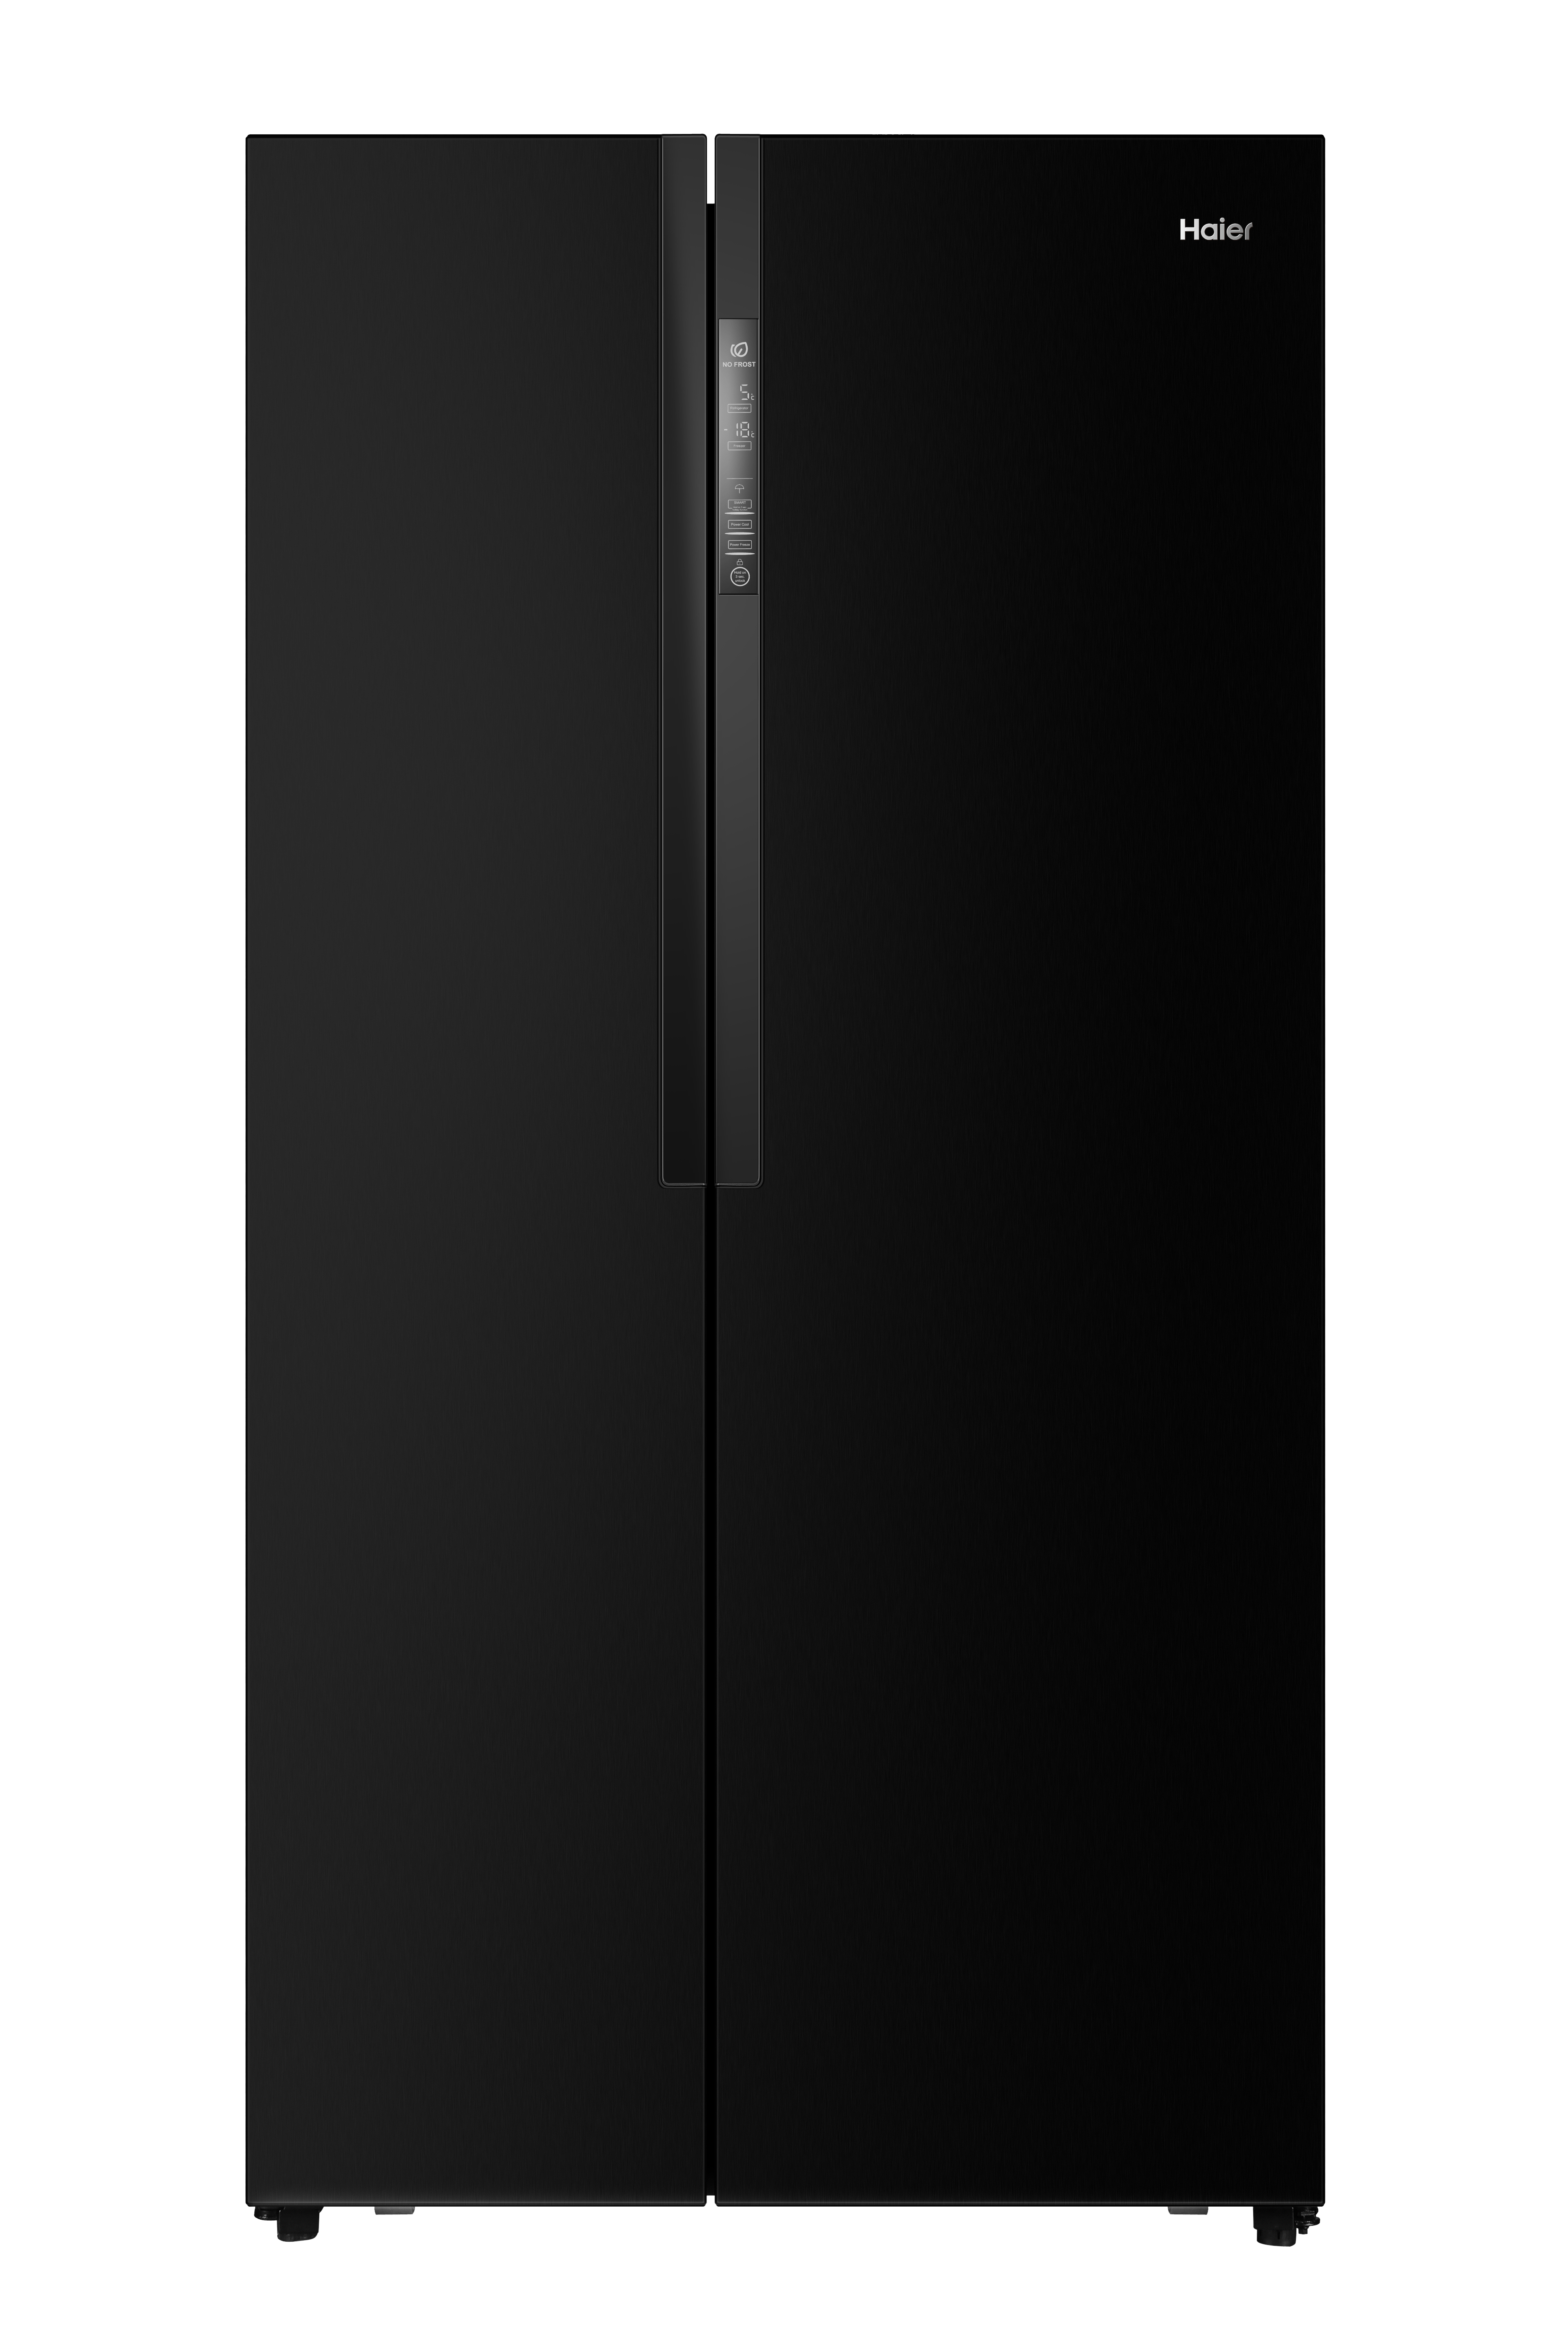 HAIER INTRODUCES THE SLIMMEST SIDE BY SIDE REFRIGERATOR 